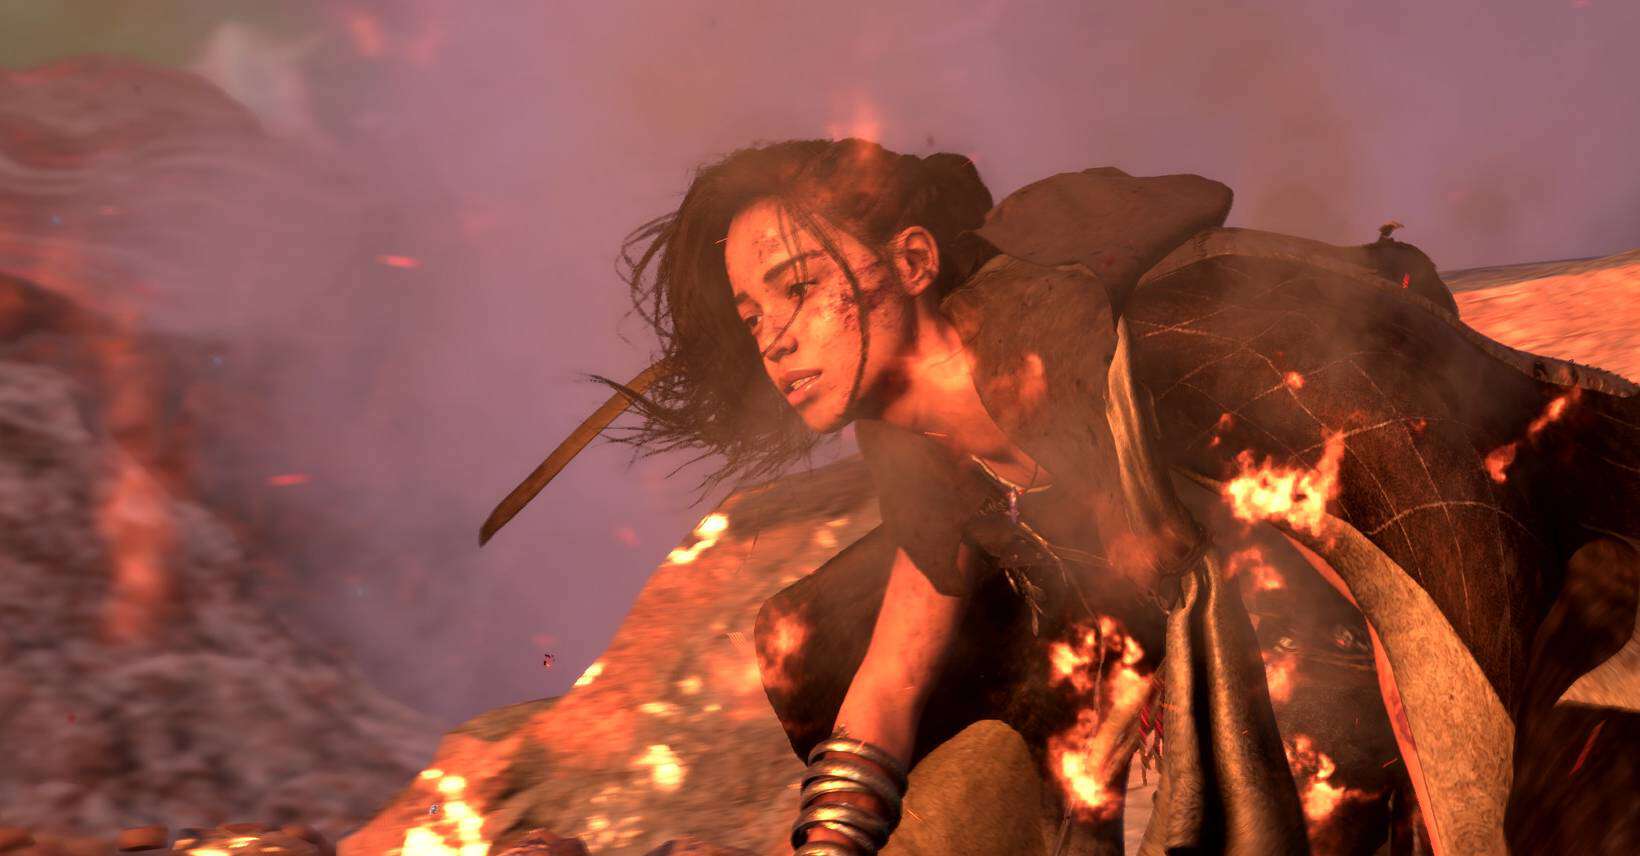 A woman wielding a sword stands confidently in front of a blazing fire, embodying the essence of power and strength.